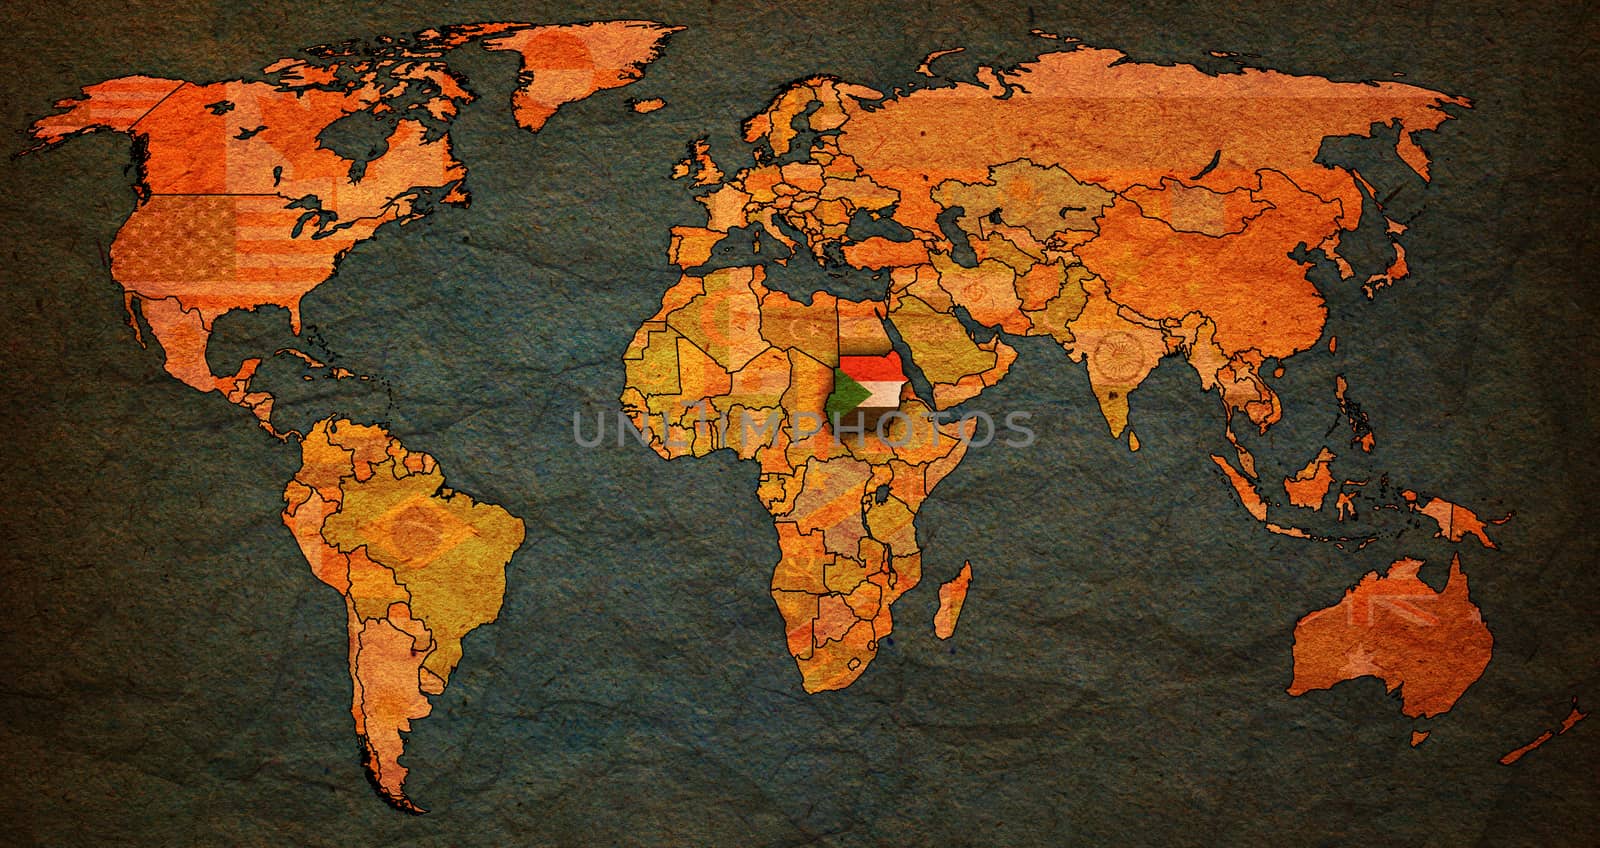 sudan territory on world map by michal812